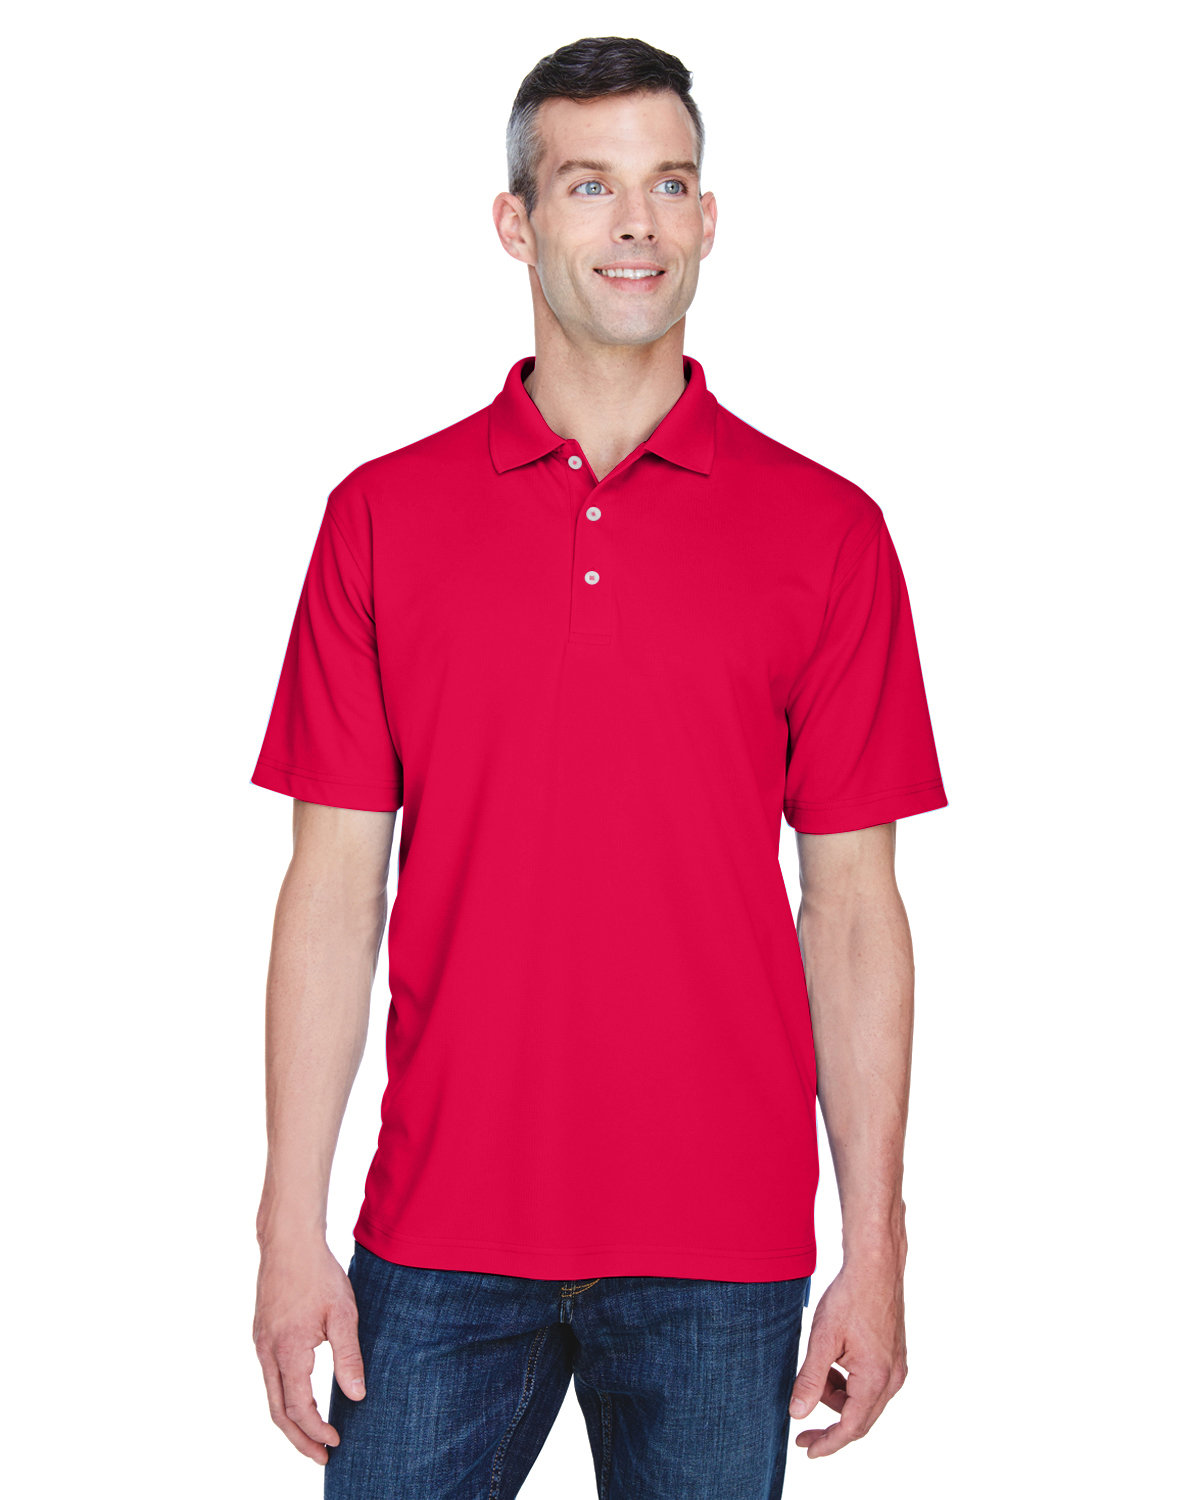 UltraClub Men's Cool & Dry Stain-Release Performance Polo | alphabroder